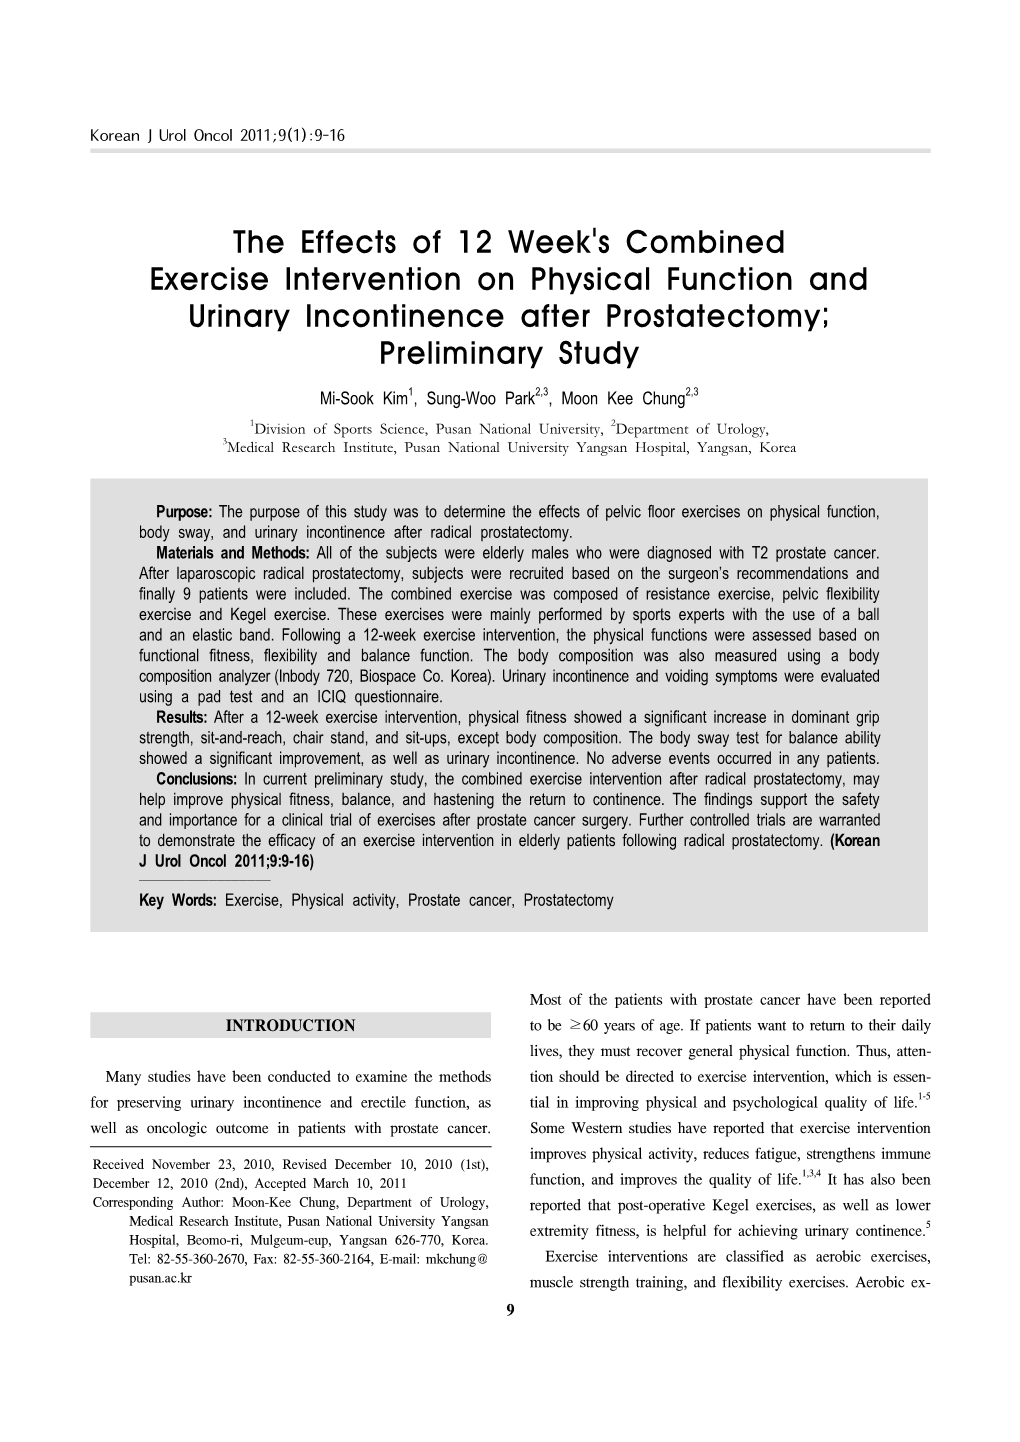 The Effects of 12 Week's Combined Exercise Intervention on Physical Function and Urinary Incontinence After Prostatectomy; Preliminary Study